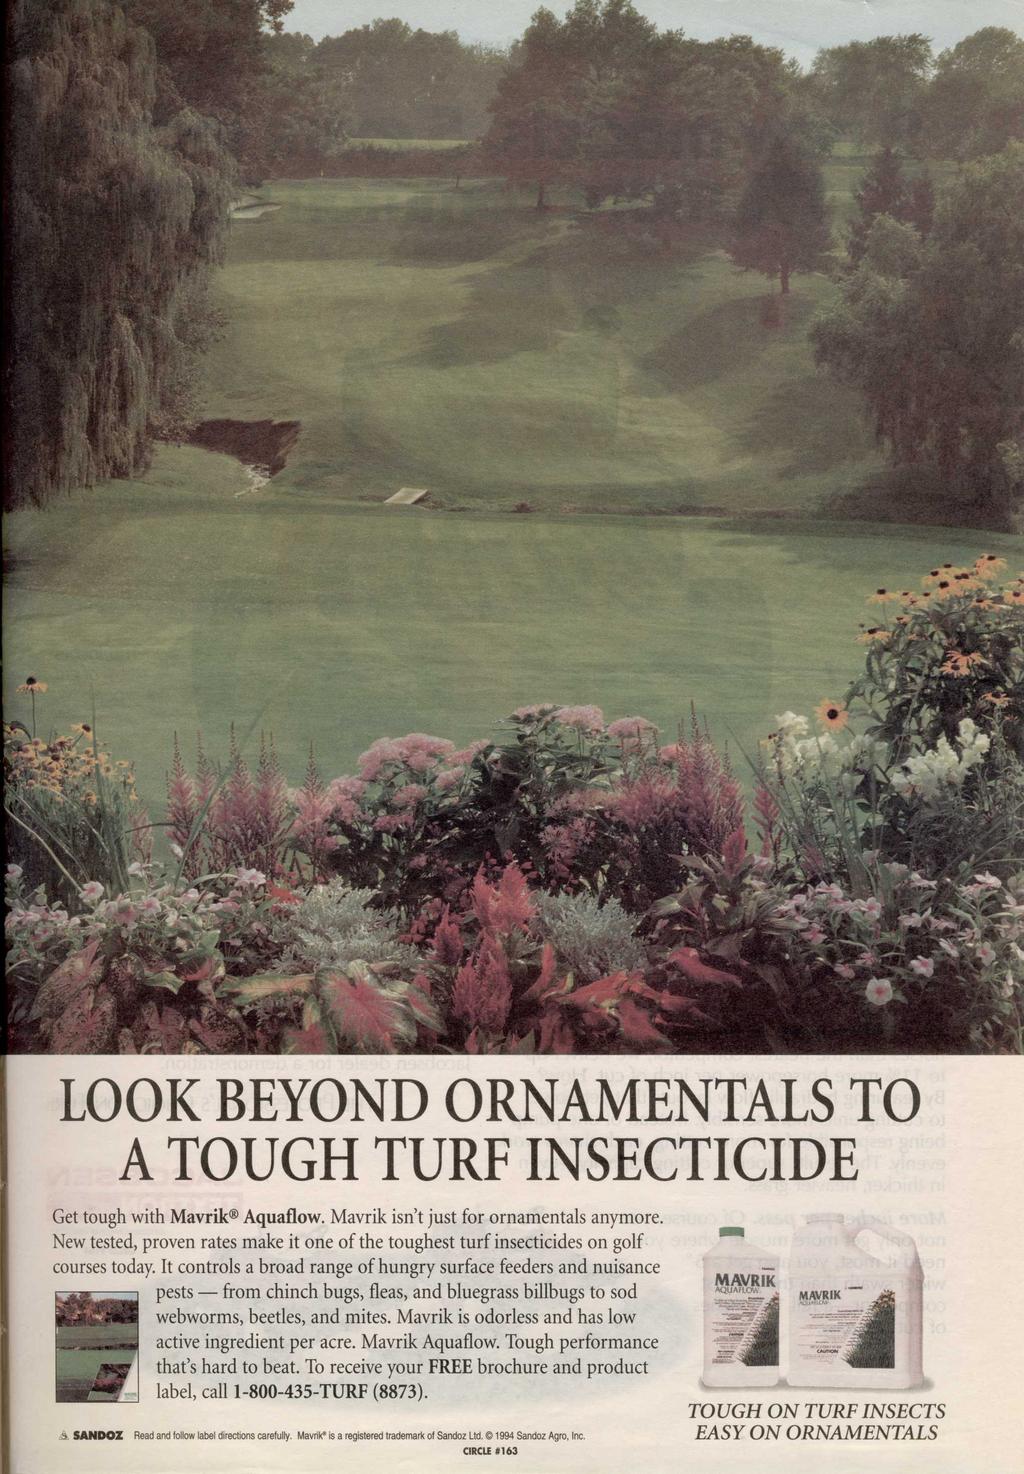 LOOK BEYOND ORNAMENTALS TO A TOUGH TURF INSECTICIDE Get tough with Mavrik Aquaflow. Mavrik isn't just for ornamentals anymore.